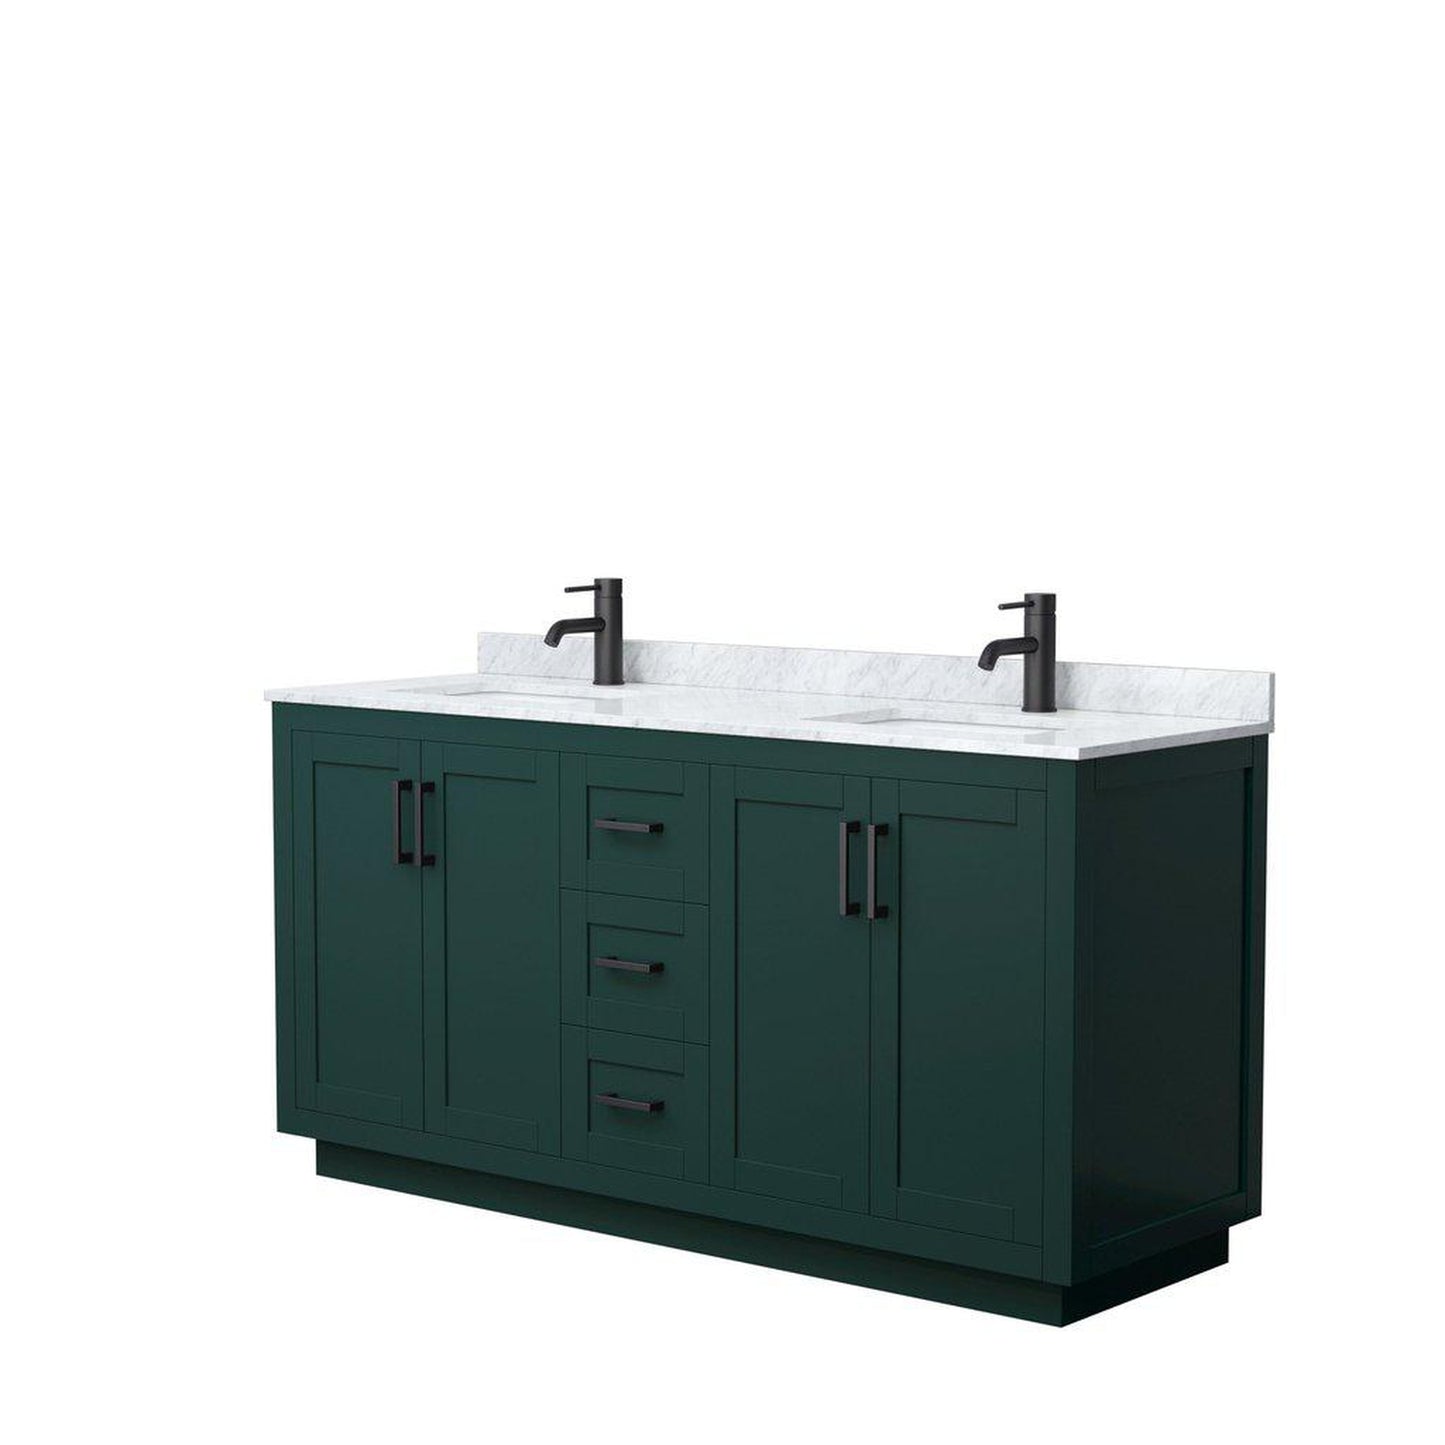 Wyndham Collection Miranda 66" Double Bathroom Green Vanity Set With White Carrara Marble Countertop, Undermount Square Sink, And Matte Black Trim